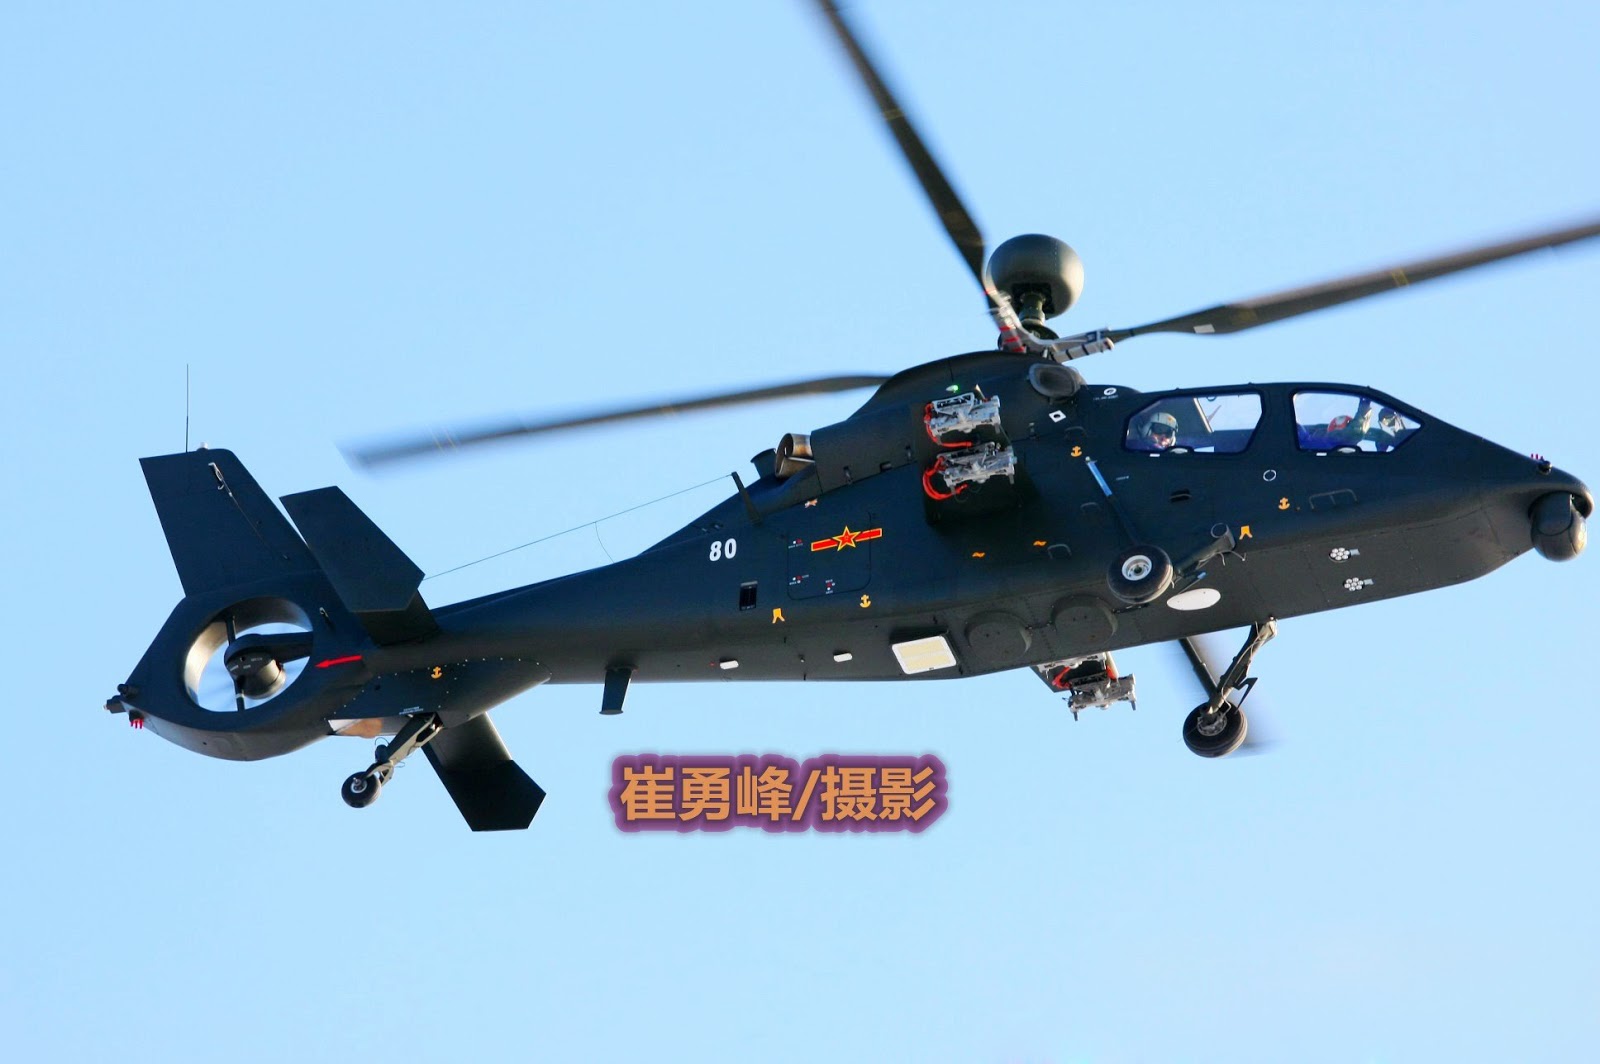 Z-19+++MMR+-+Z-19+attack+helicopter+gunship+Chinese+HAIC+W+People's+Liberation+Army+(PLA)+export+anti+tank+missile+armor+aff+(8)pakistan+army+ah-1missile+Fire+Control+Radar+.jpg